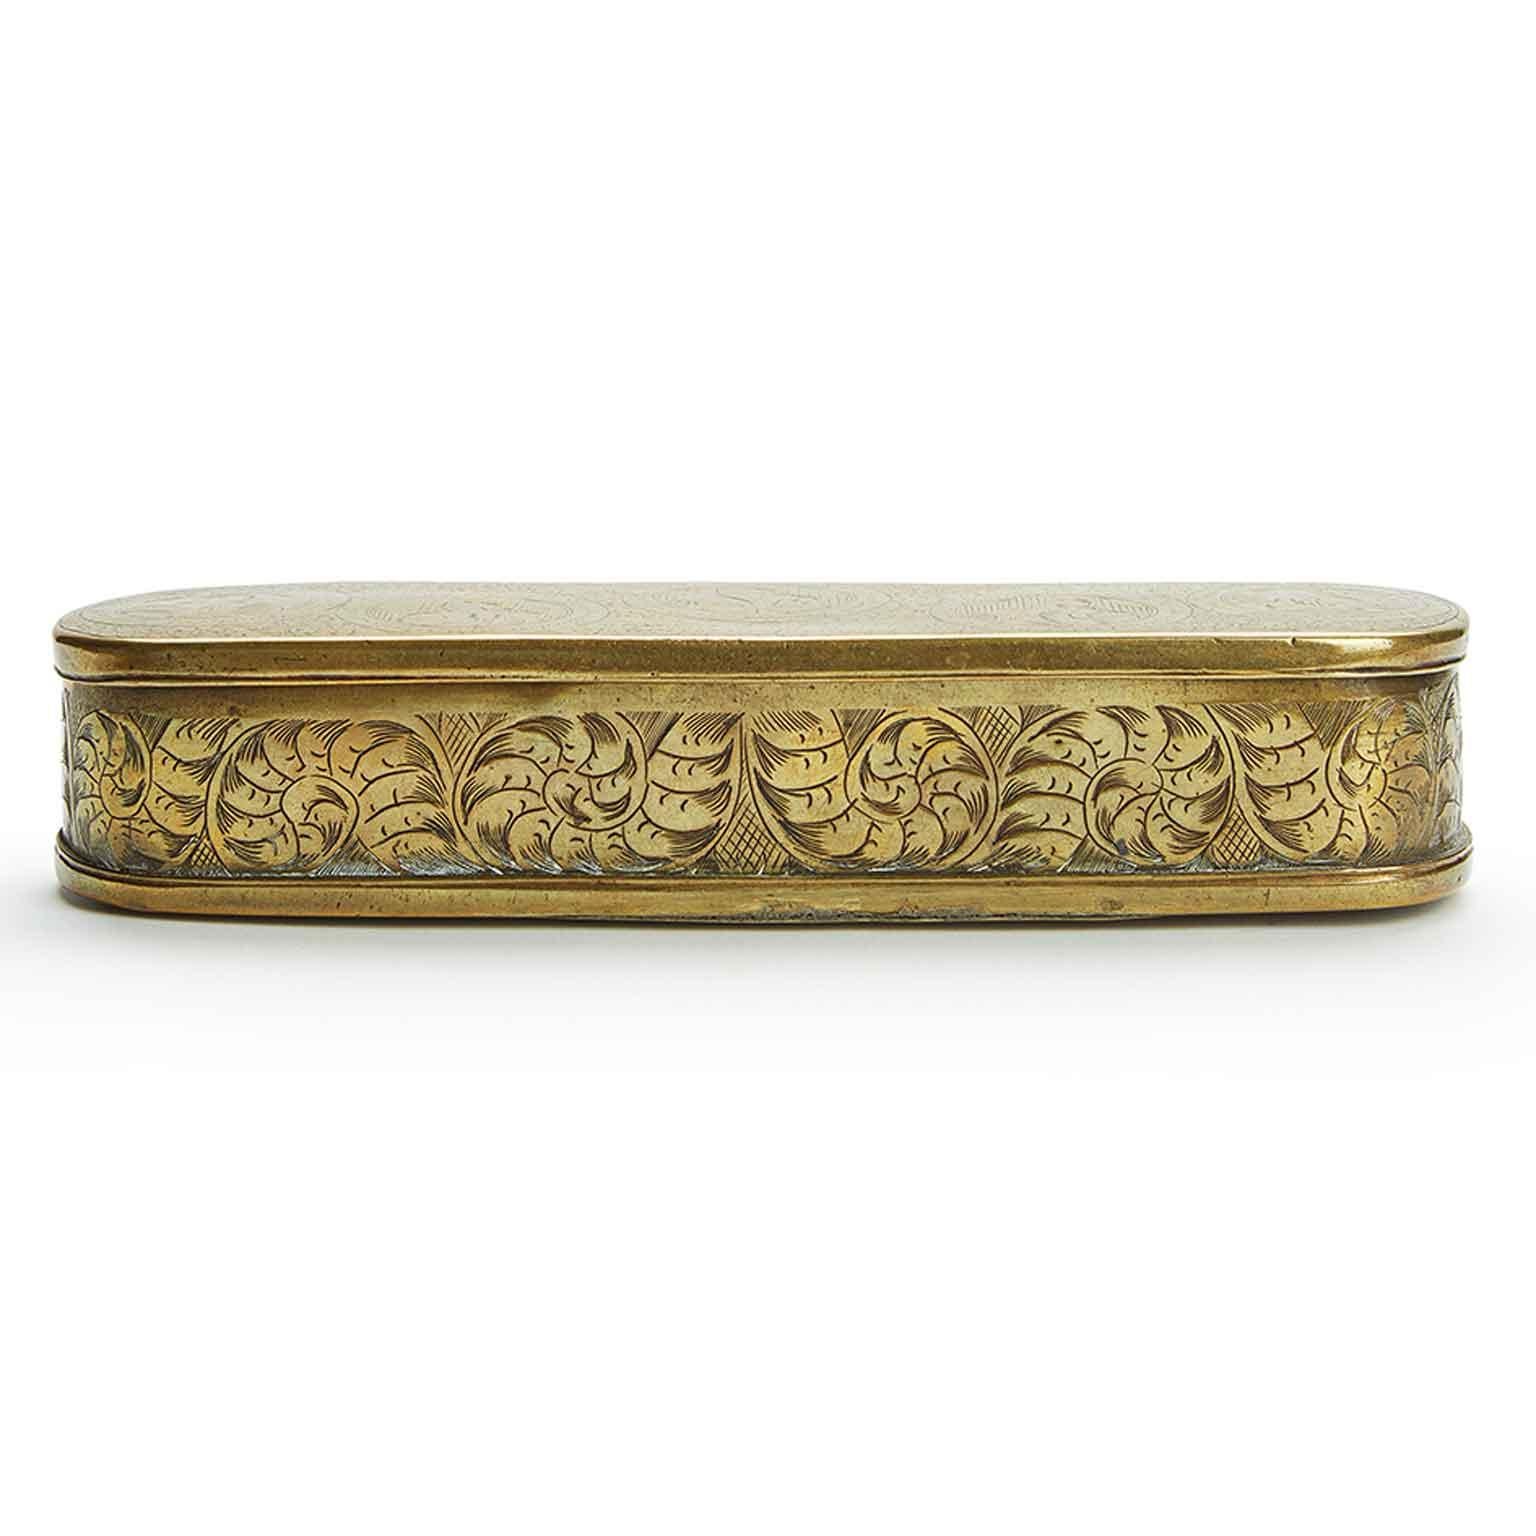 18th Century Dutch Tobacco Box Engraved Brass Snuff Box Brass with Figures